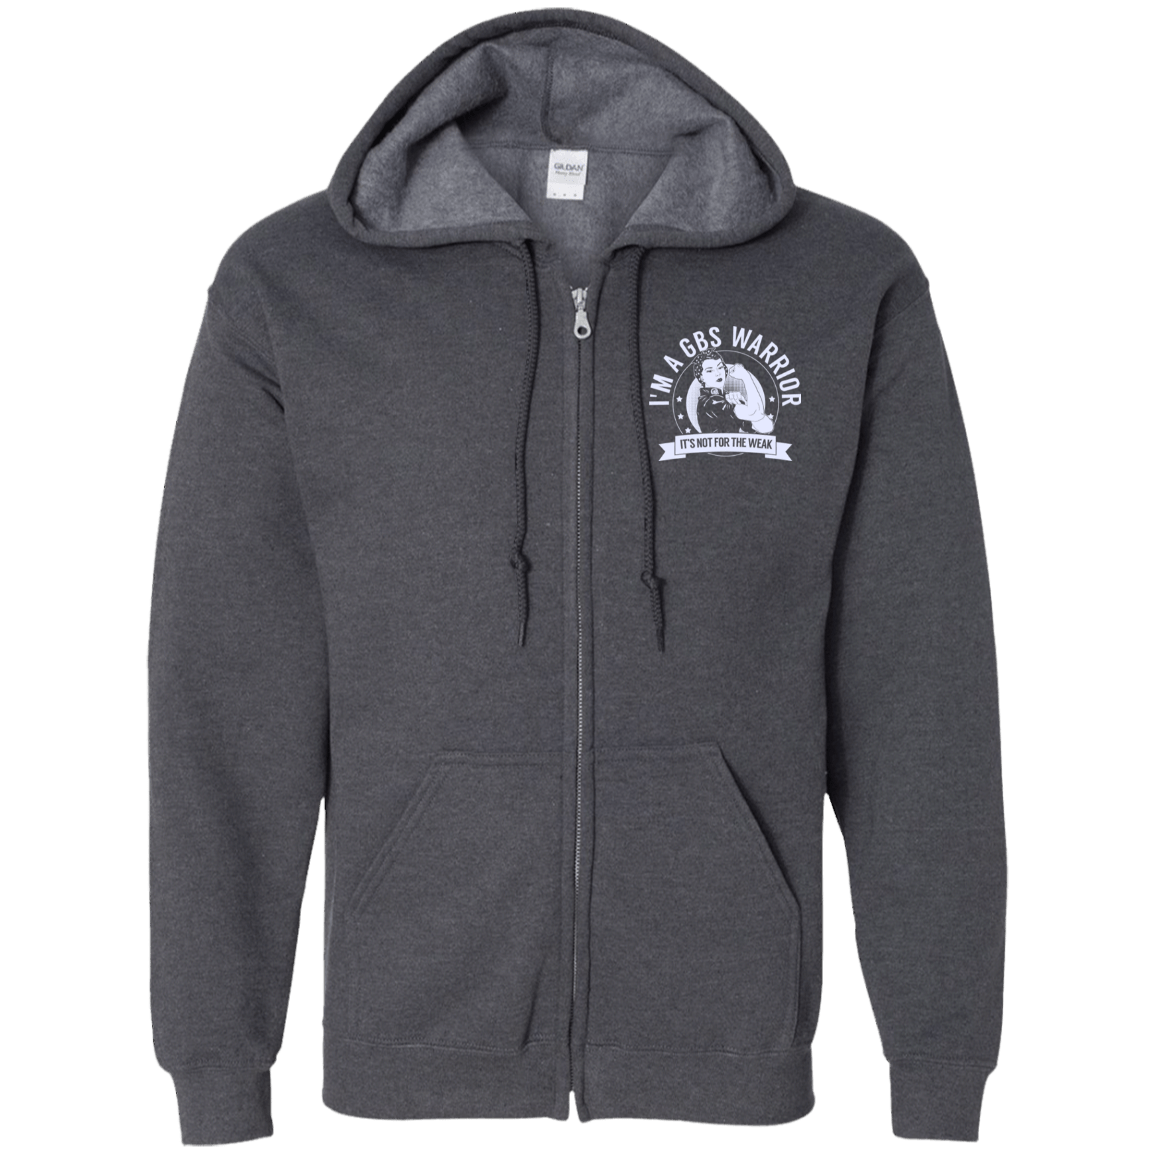 Guillain-Barré Syndrome - GBS Warrior Not For The Weak Zip Up Hooded Sweatshirt - The Unchargeables